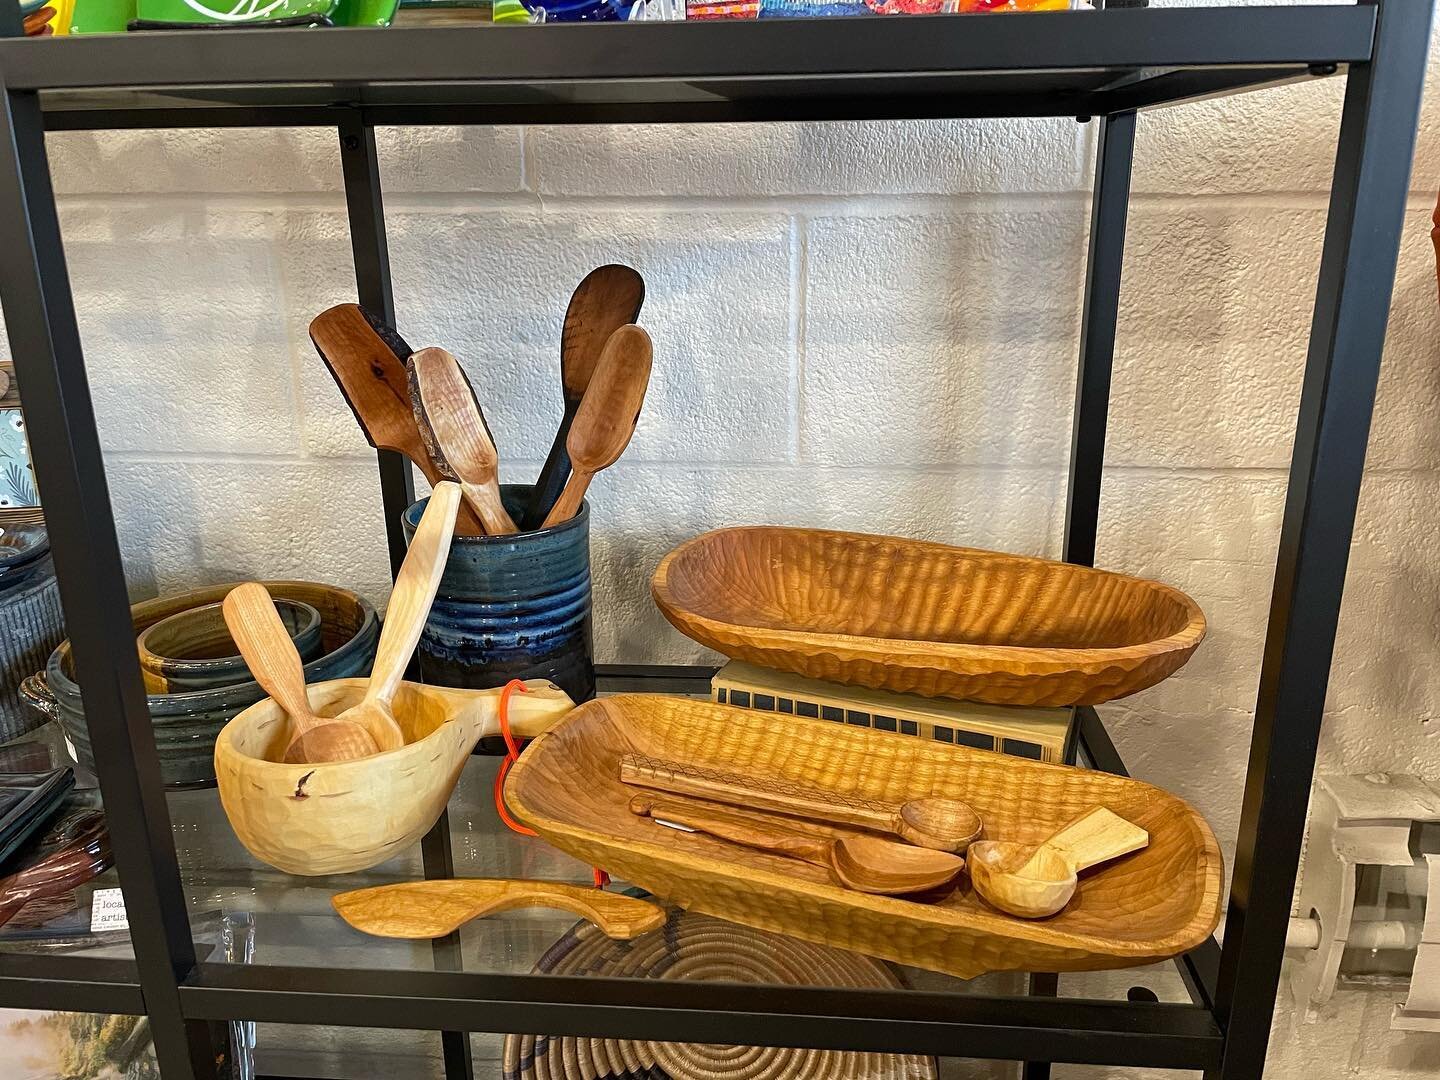 I&rsquo;m very happy to have a selection of my bowls and spoons for sale at @edmonds.crow in downtown Edmonds. A big thanks to store owner Jen for this opportunity. And thanks to @michelerene.e for helping me set up the display. I will also be in sto